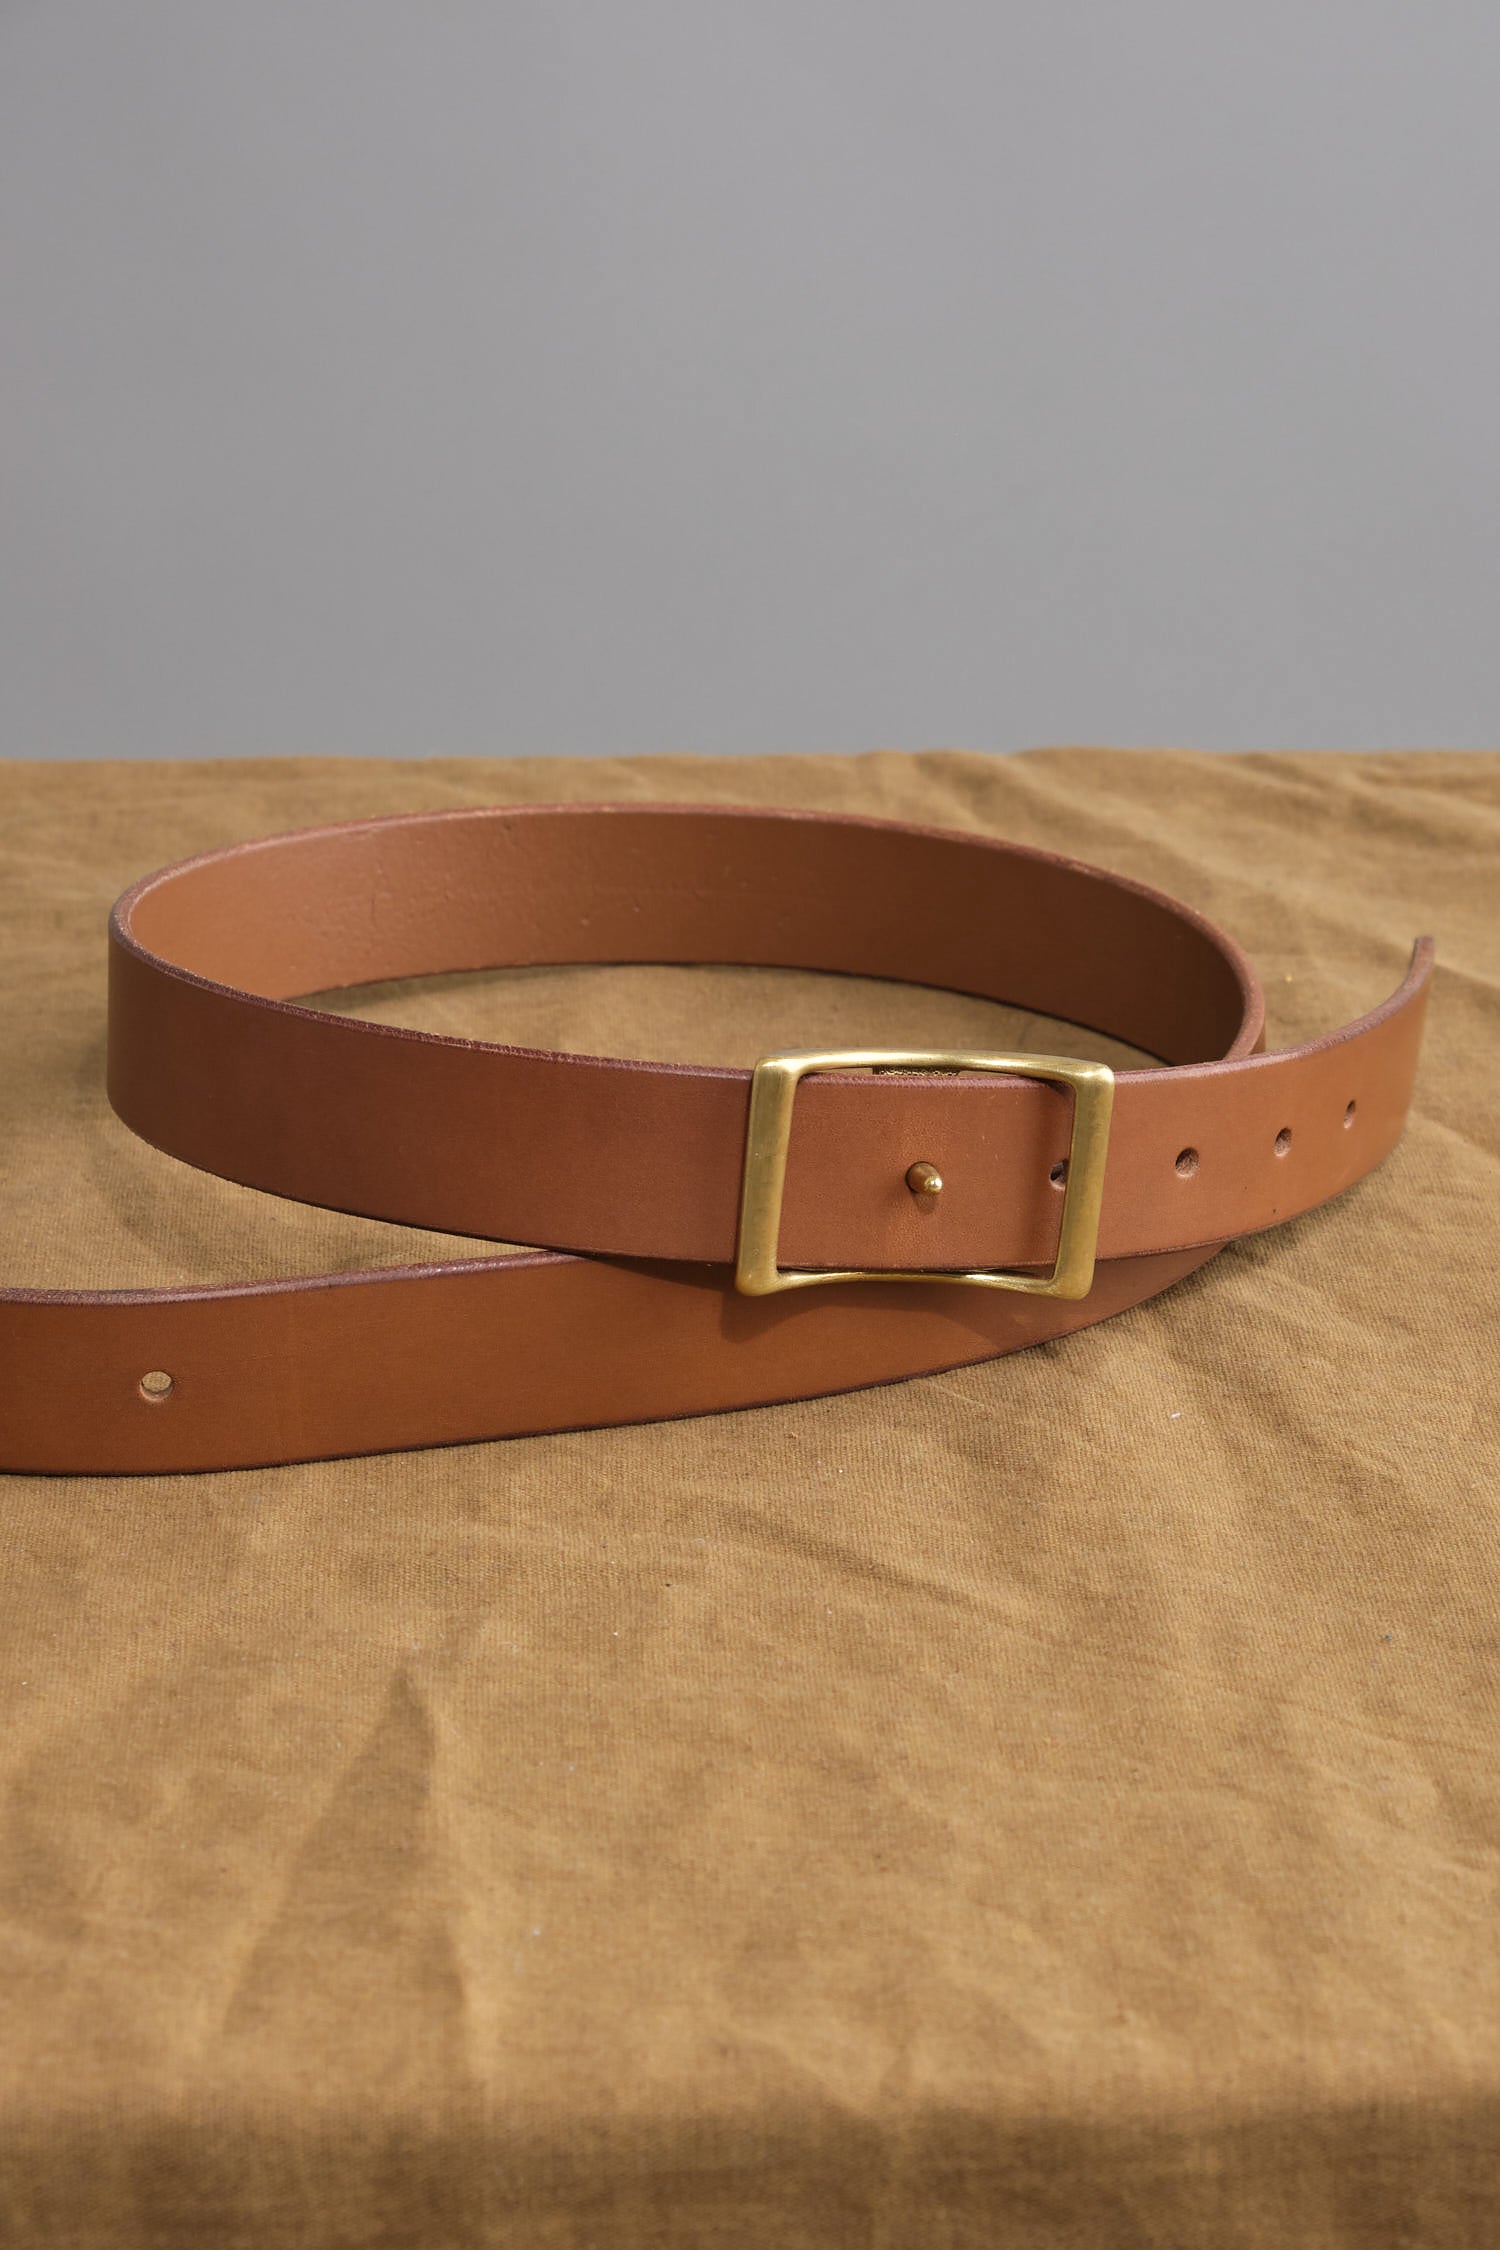 Conway Belt on table